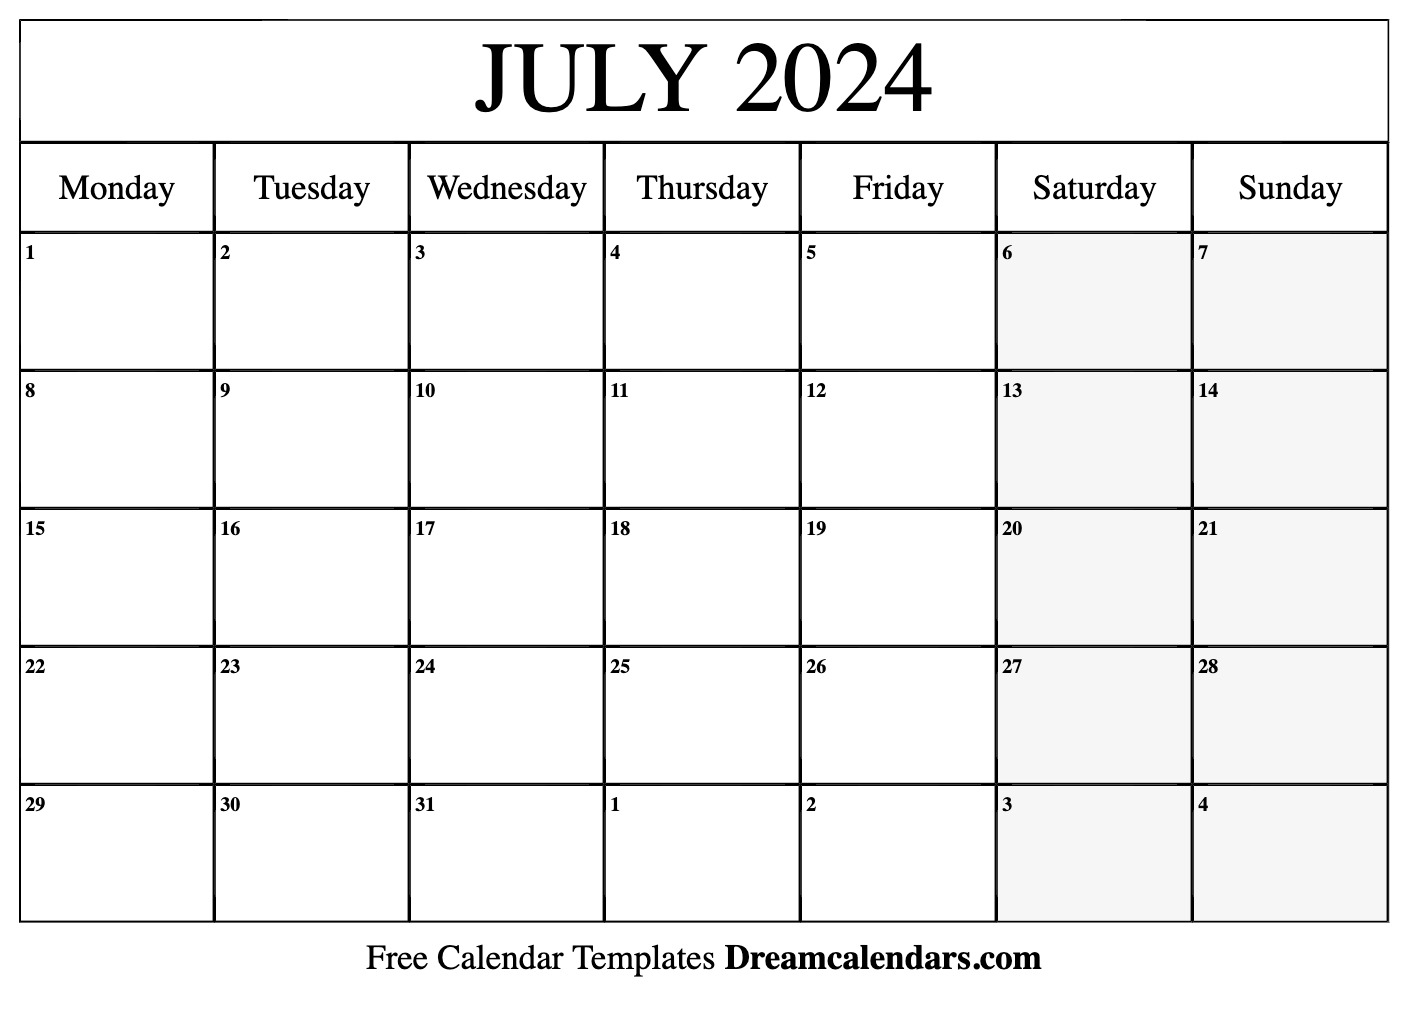 July 2024 Calendar Free Printable with Holidays and Observances